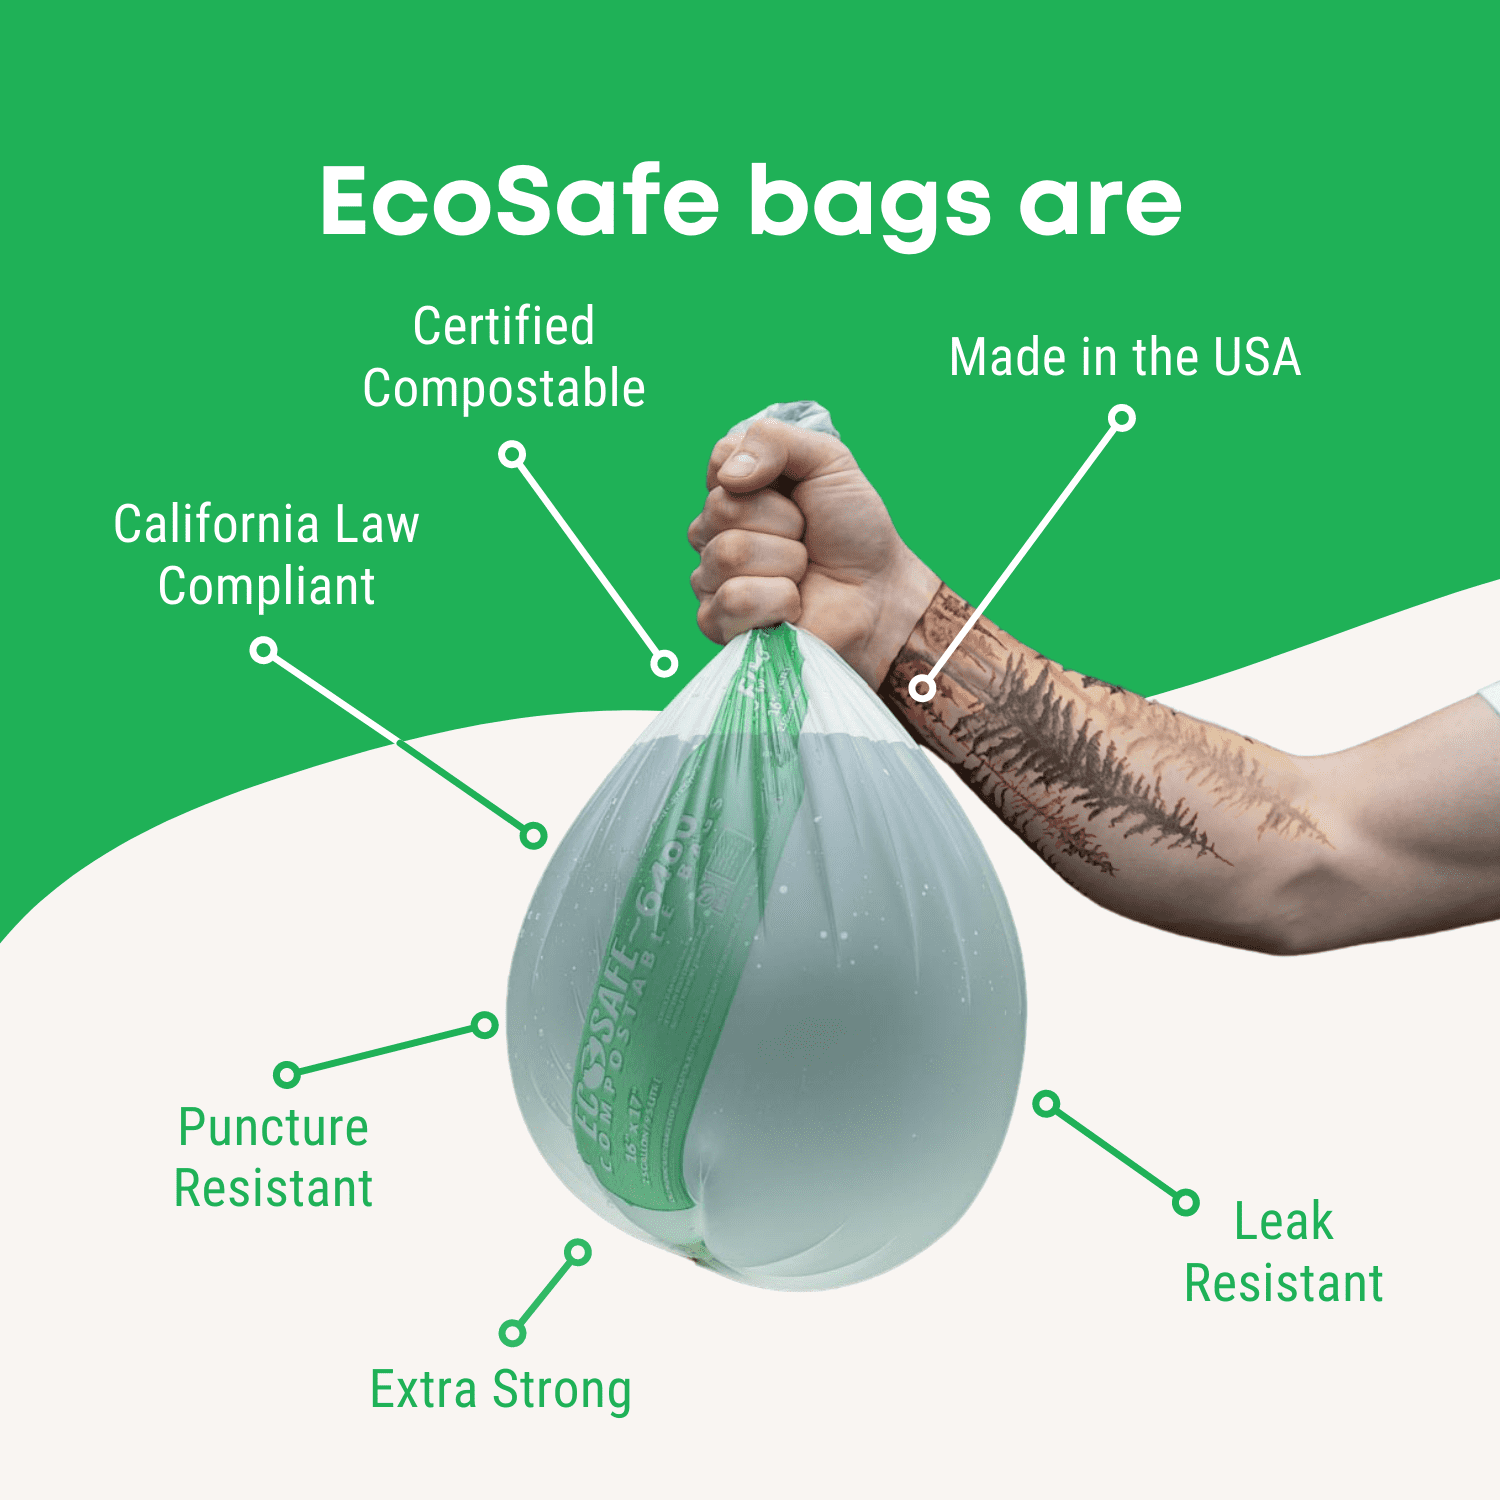 Features of EcoSafe bags